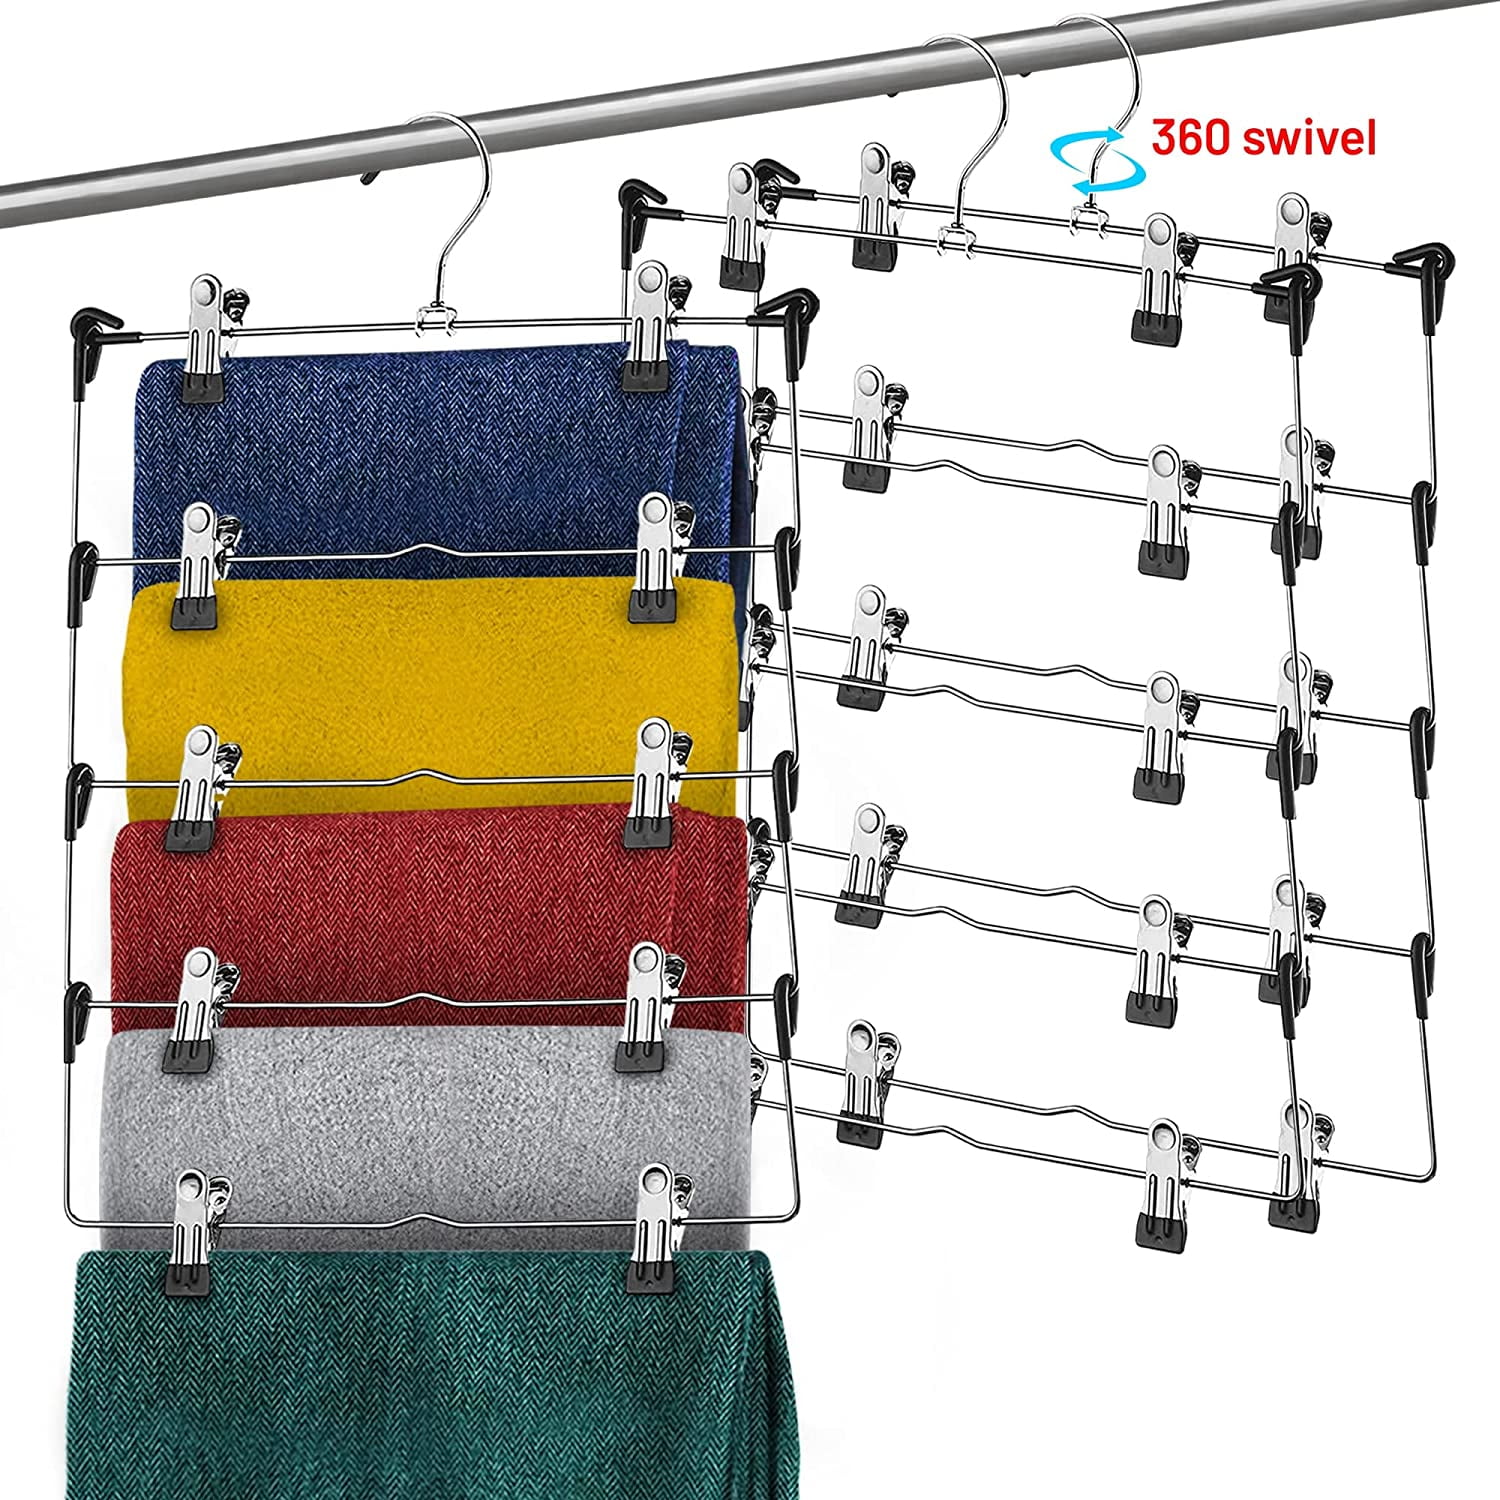 Zober Space Saving 5 Tier Metal Skirt Hanger with Clips Hang 5-on-1 Gain 70% More Space Rubber Coated Hanger Clips 360 Swivel Hook Adjustable Clips PA